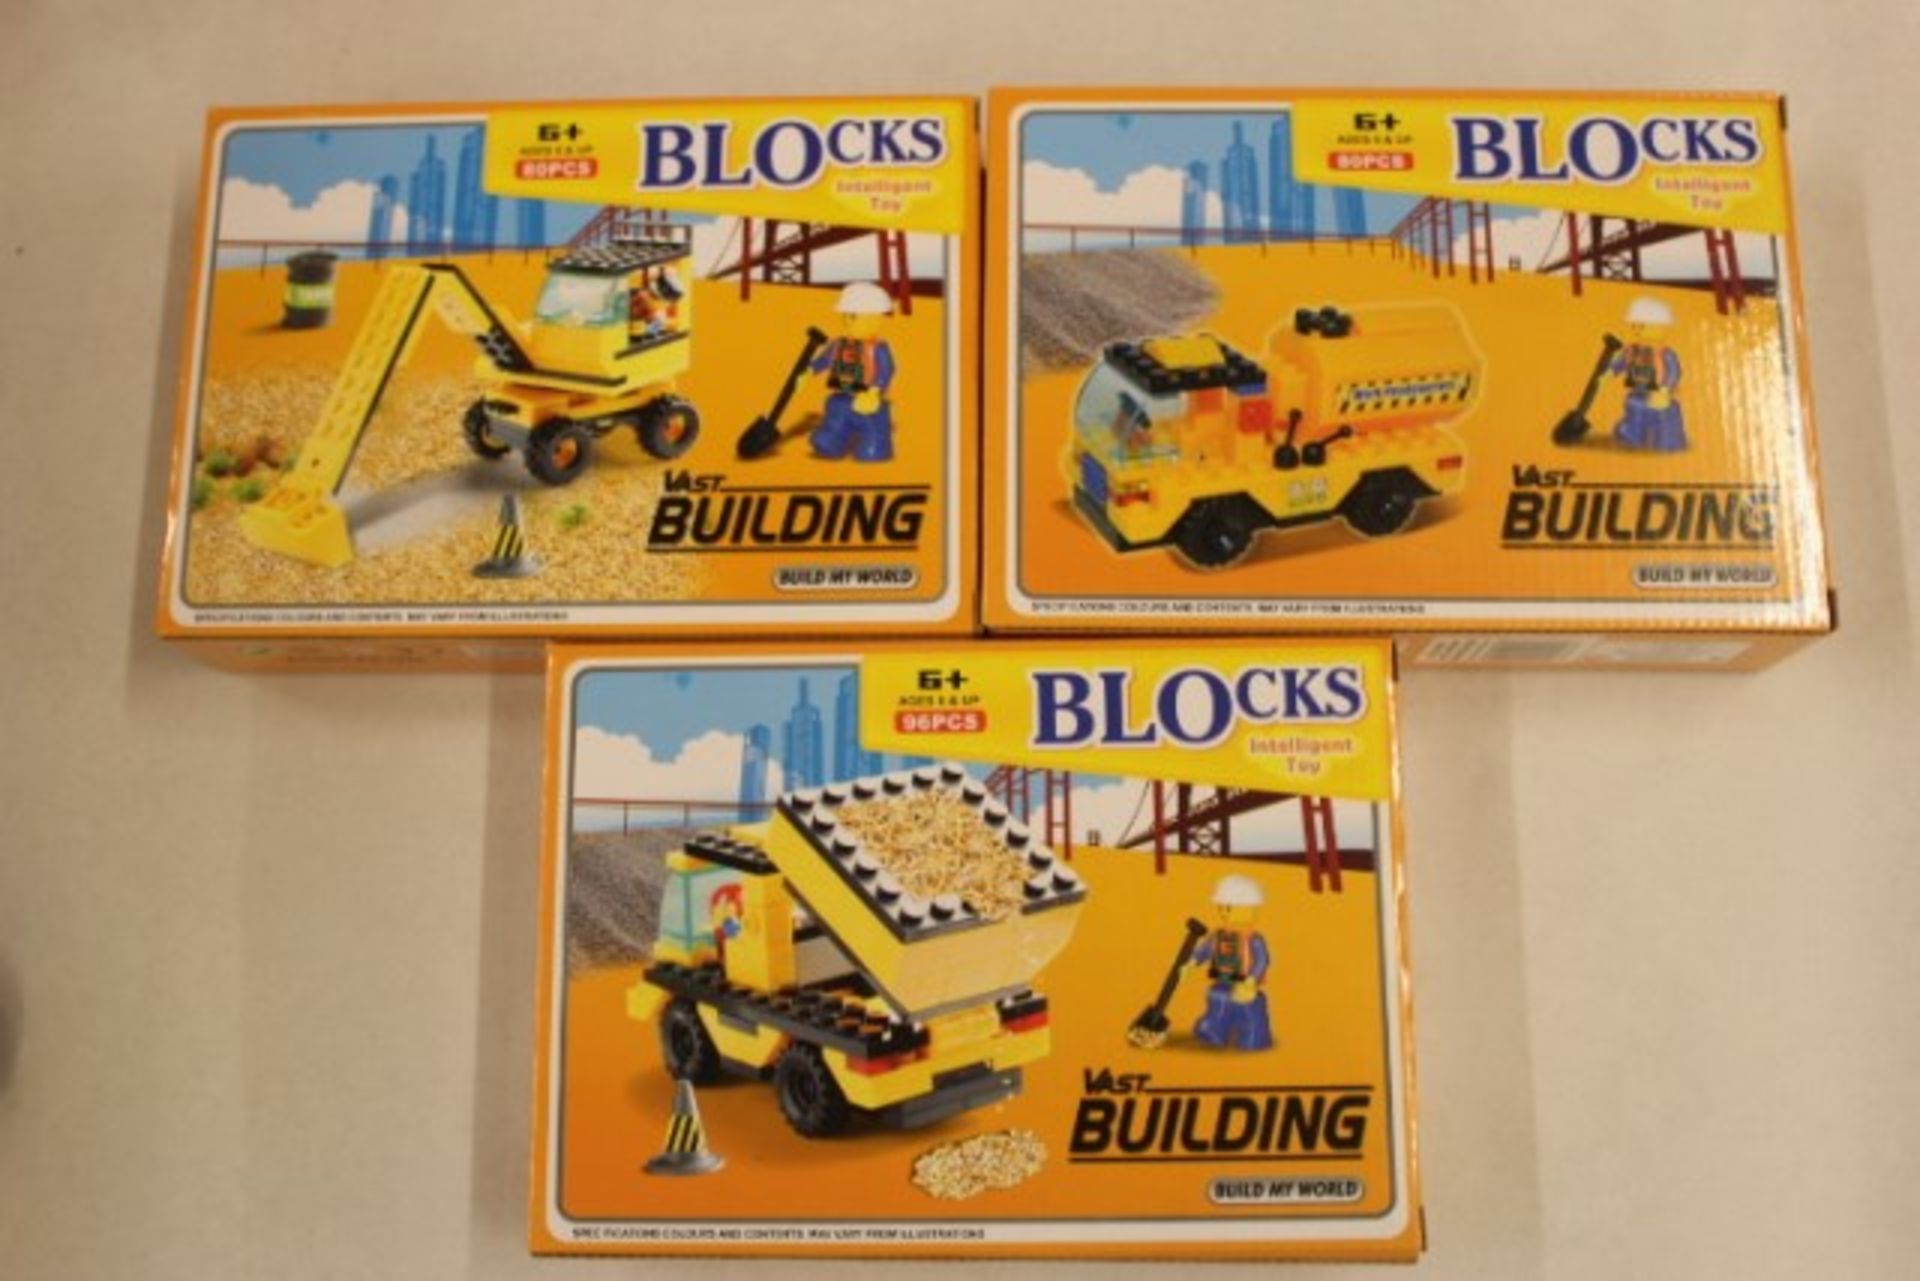 V *TRADE QTY* Brand New 80/96pc Lego Type Construction Kit Intelligent Toy X 4 YOUR BID PRICE TO